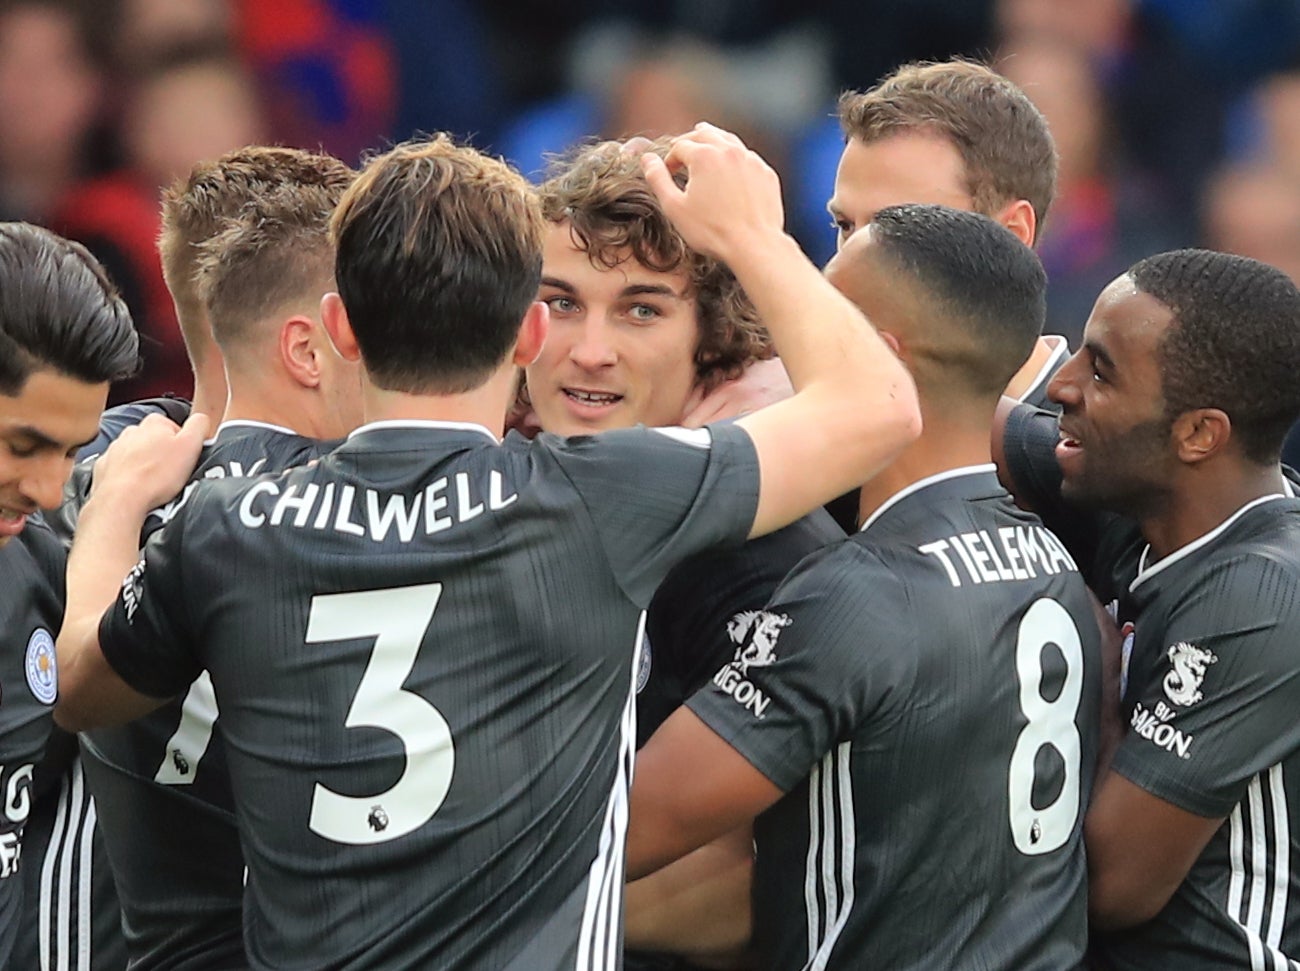 Leicester City beat Crystal Palace to move third thanks to goals from Caglar Soyuncu and Jamie Vardy